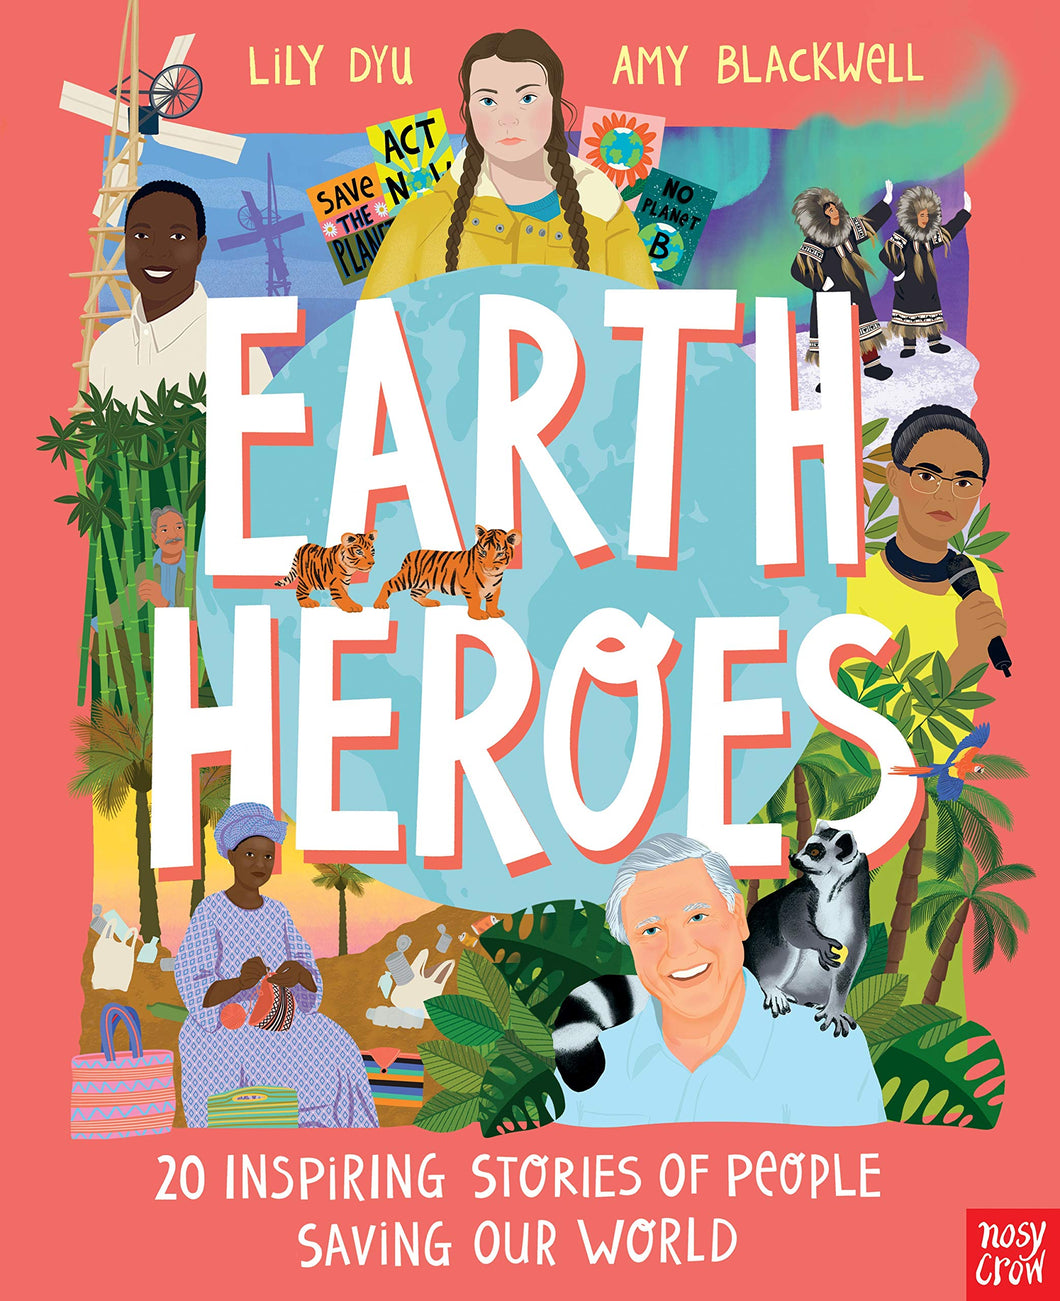 Pink-orange book cover shows the title and subtitle in capital white letters. Illustrations show 8 people including Greta Thunberg (a white woman) and David Attenborough (a white man). There are 4 medium-skinned people (one woman, one man, two androgenous people wearing indigenous clothing in the snow with the northern lights), a Black woman with a head covering making bags out of plastic bags, and a Black man around windmills.